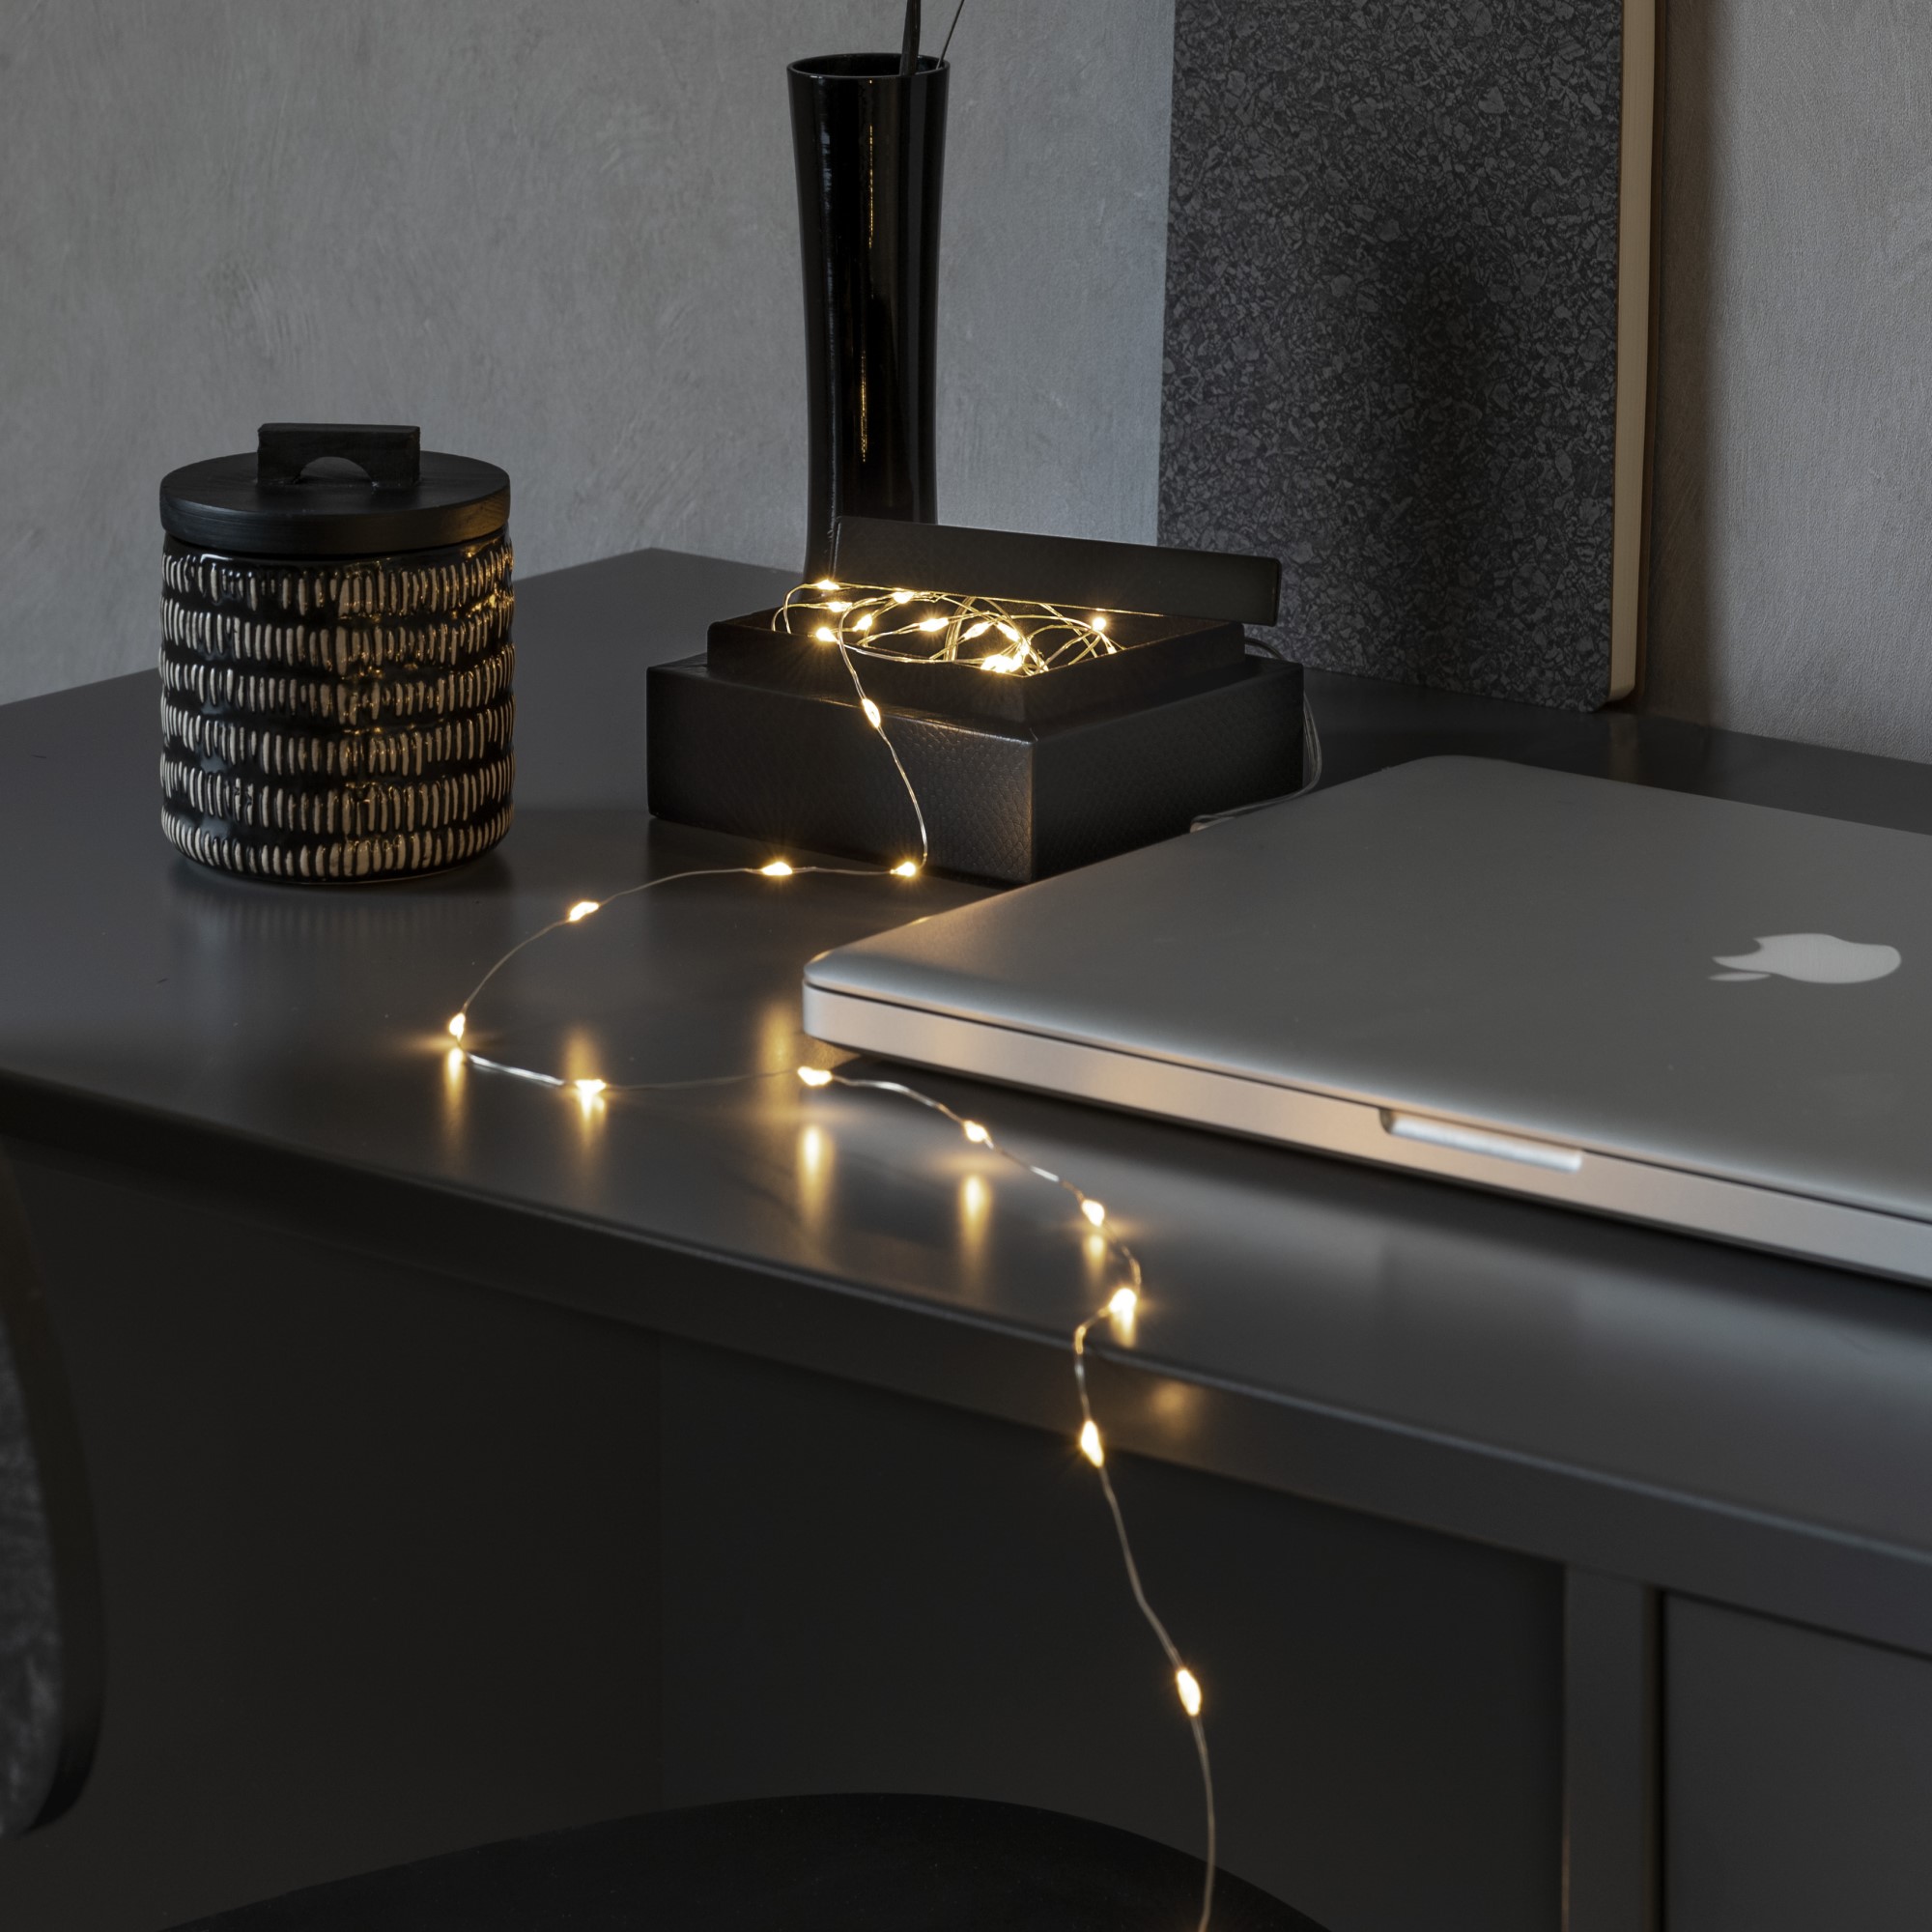 Konstsmide LED Micro Light Chain, USB Connection, 100 warm white LEDs, 4,95m, IP20